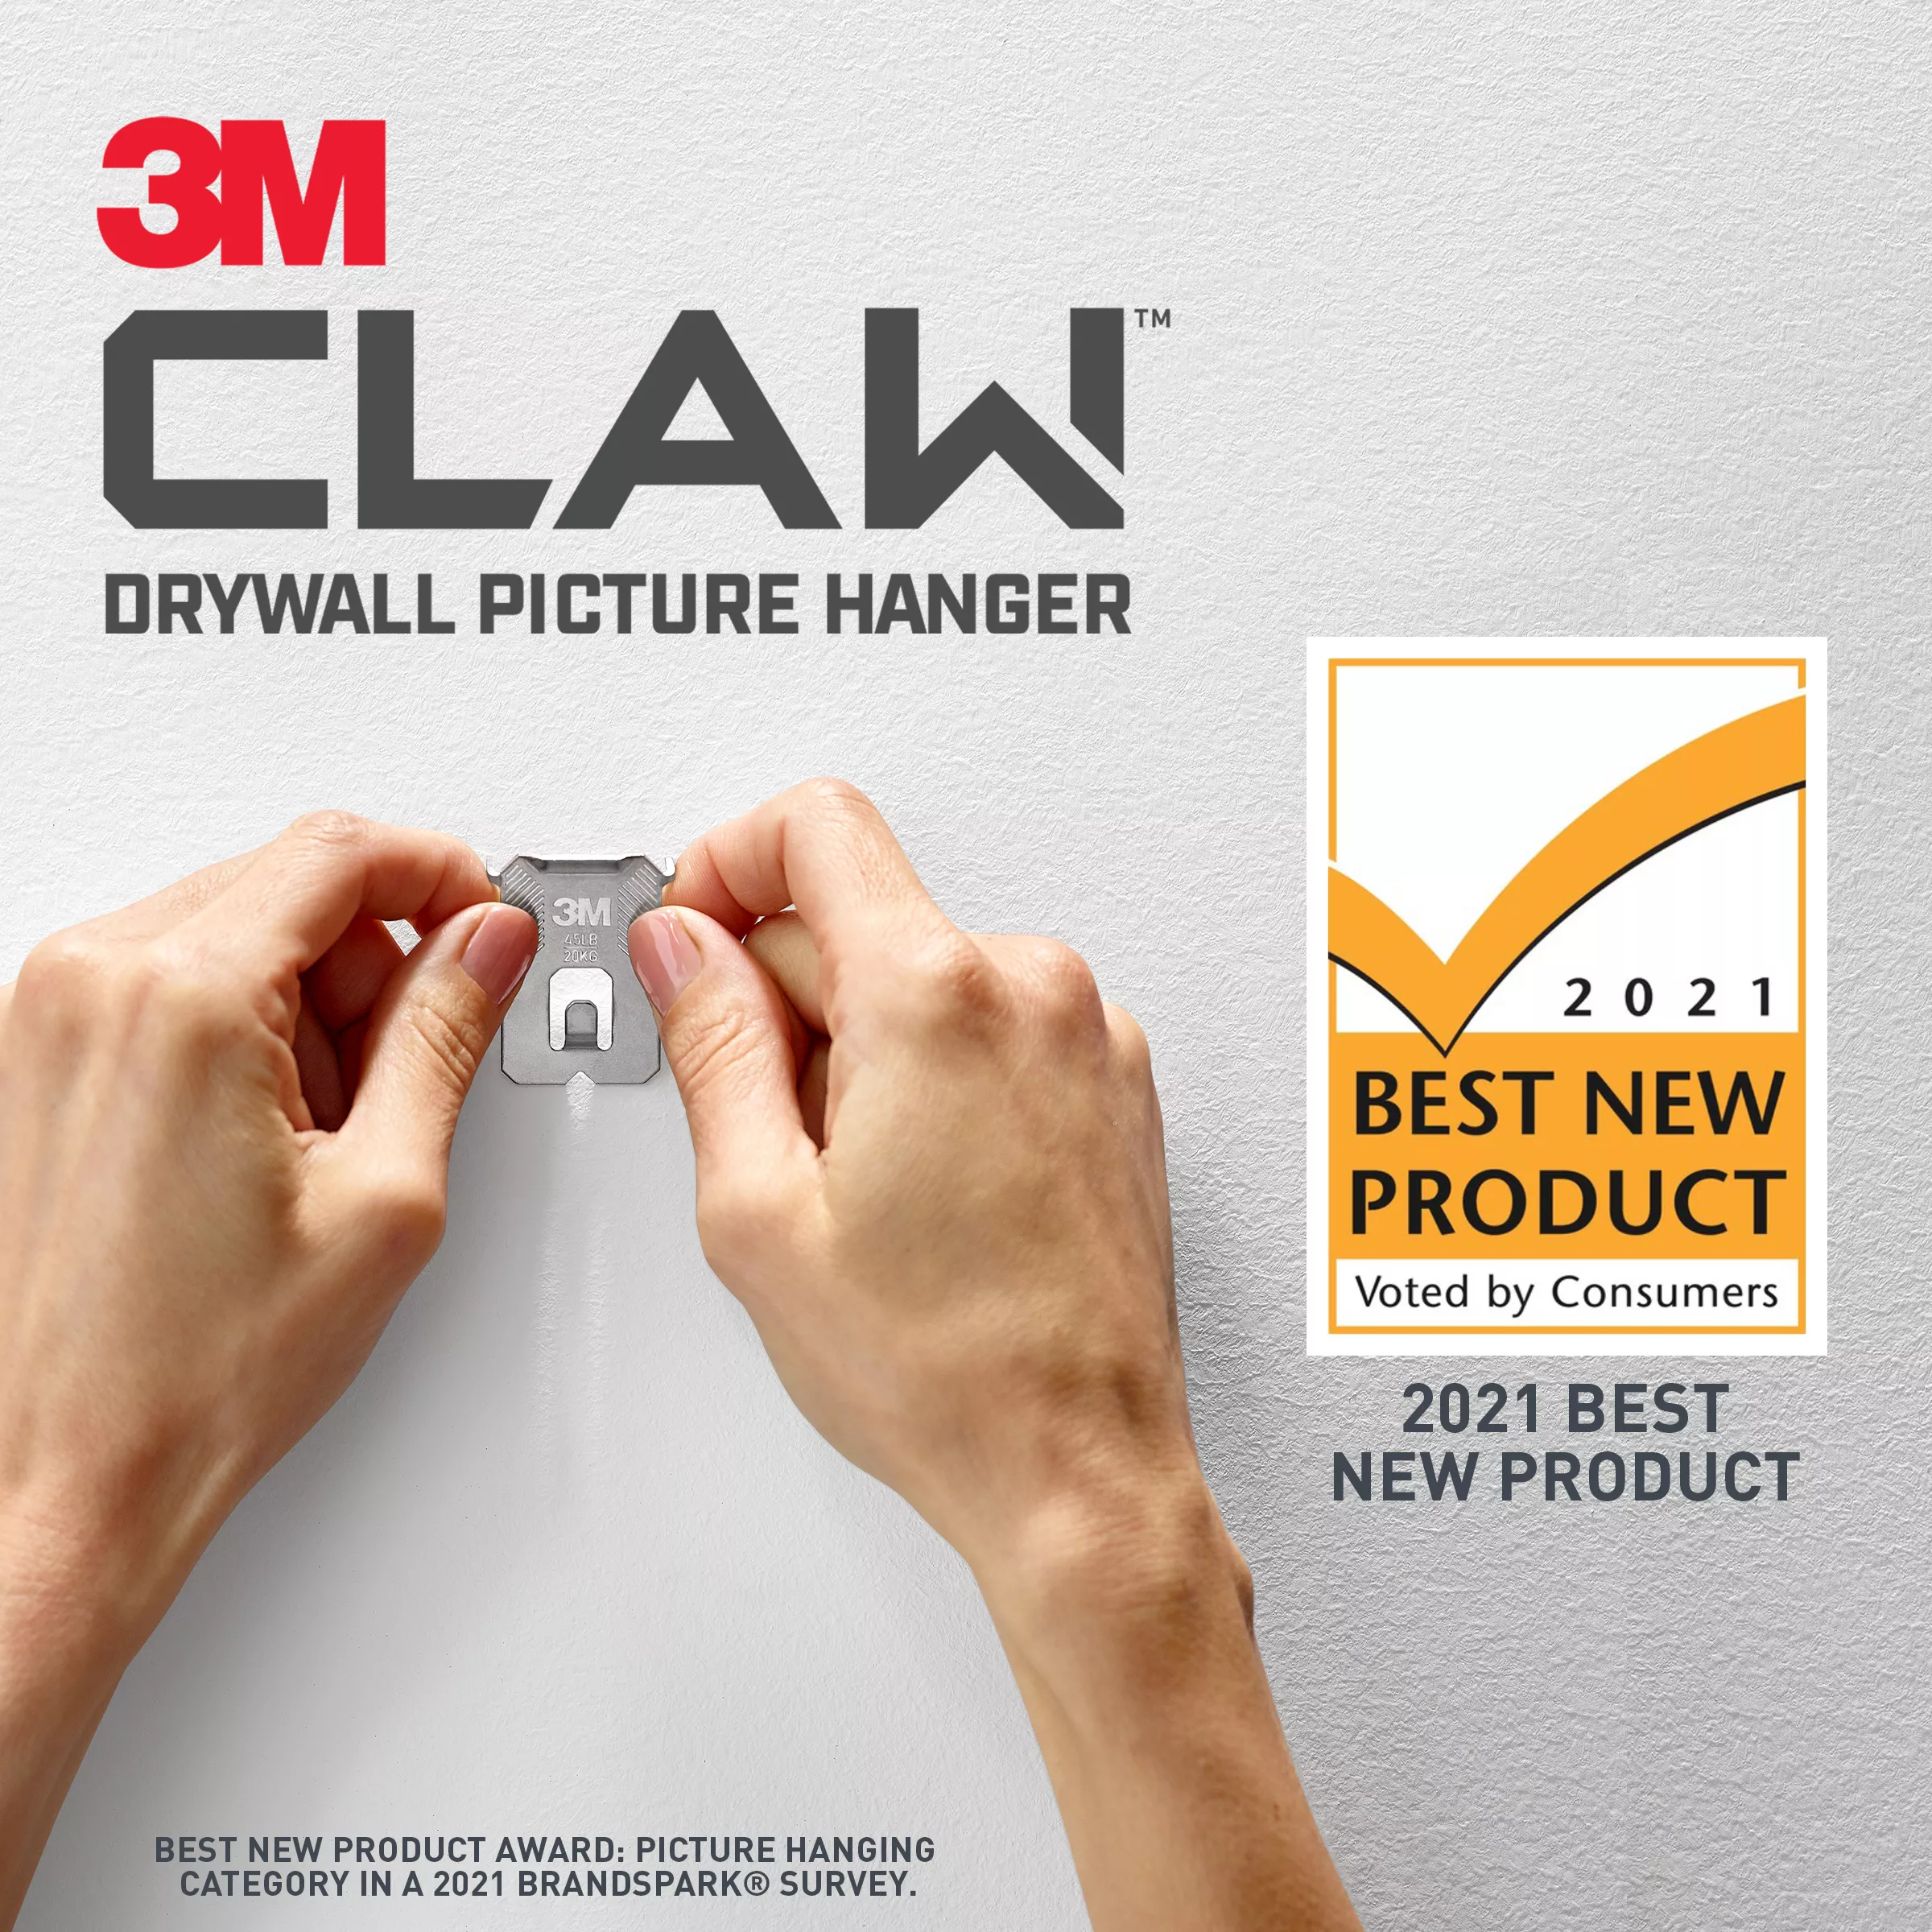 SKU 7100274758 | 3M CLAW™ Drywall Picture Hangers 25lb with Temporary Spot Markers 3PH25M-10ES